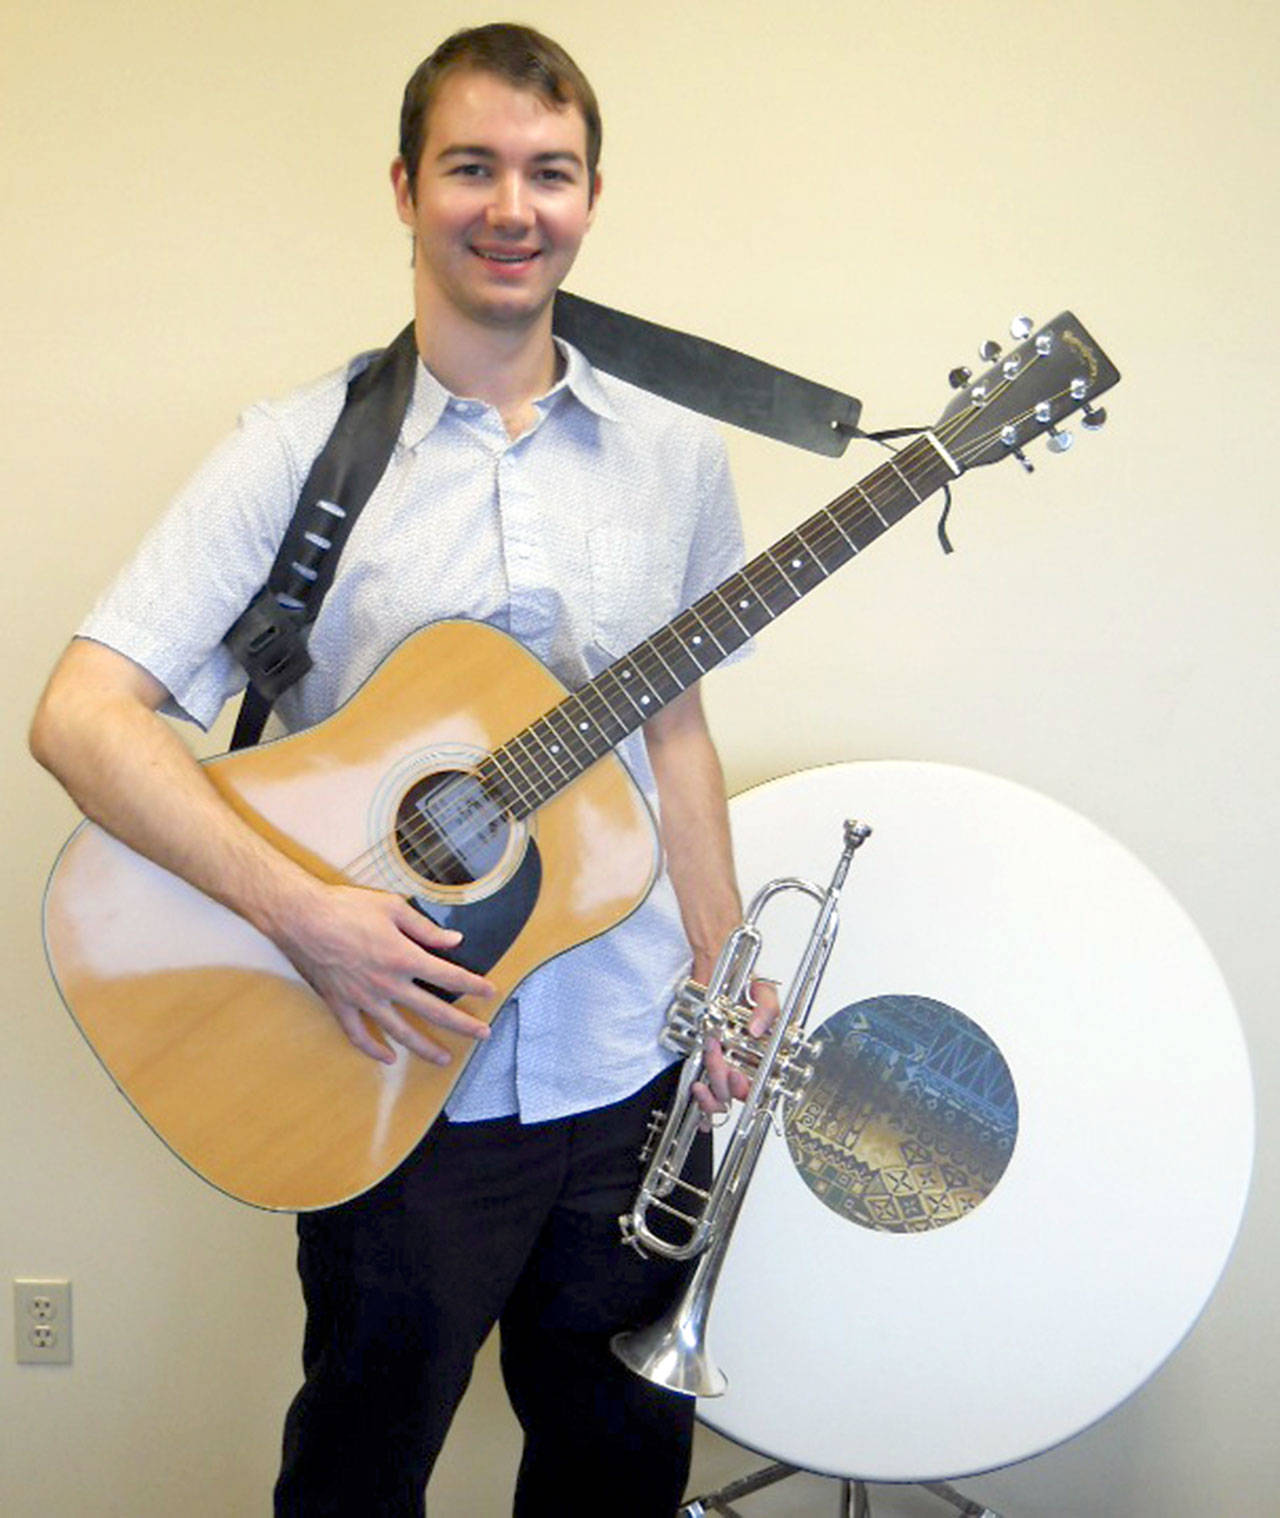 Masters student Frank Sartain has begun an internship in music therapy with OlyCAP’s Encore! Adult Day Care Center.